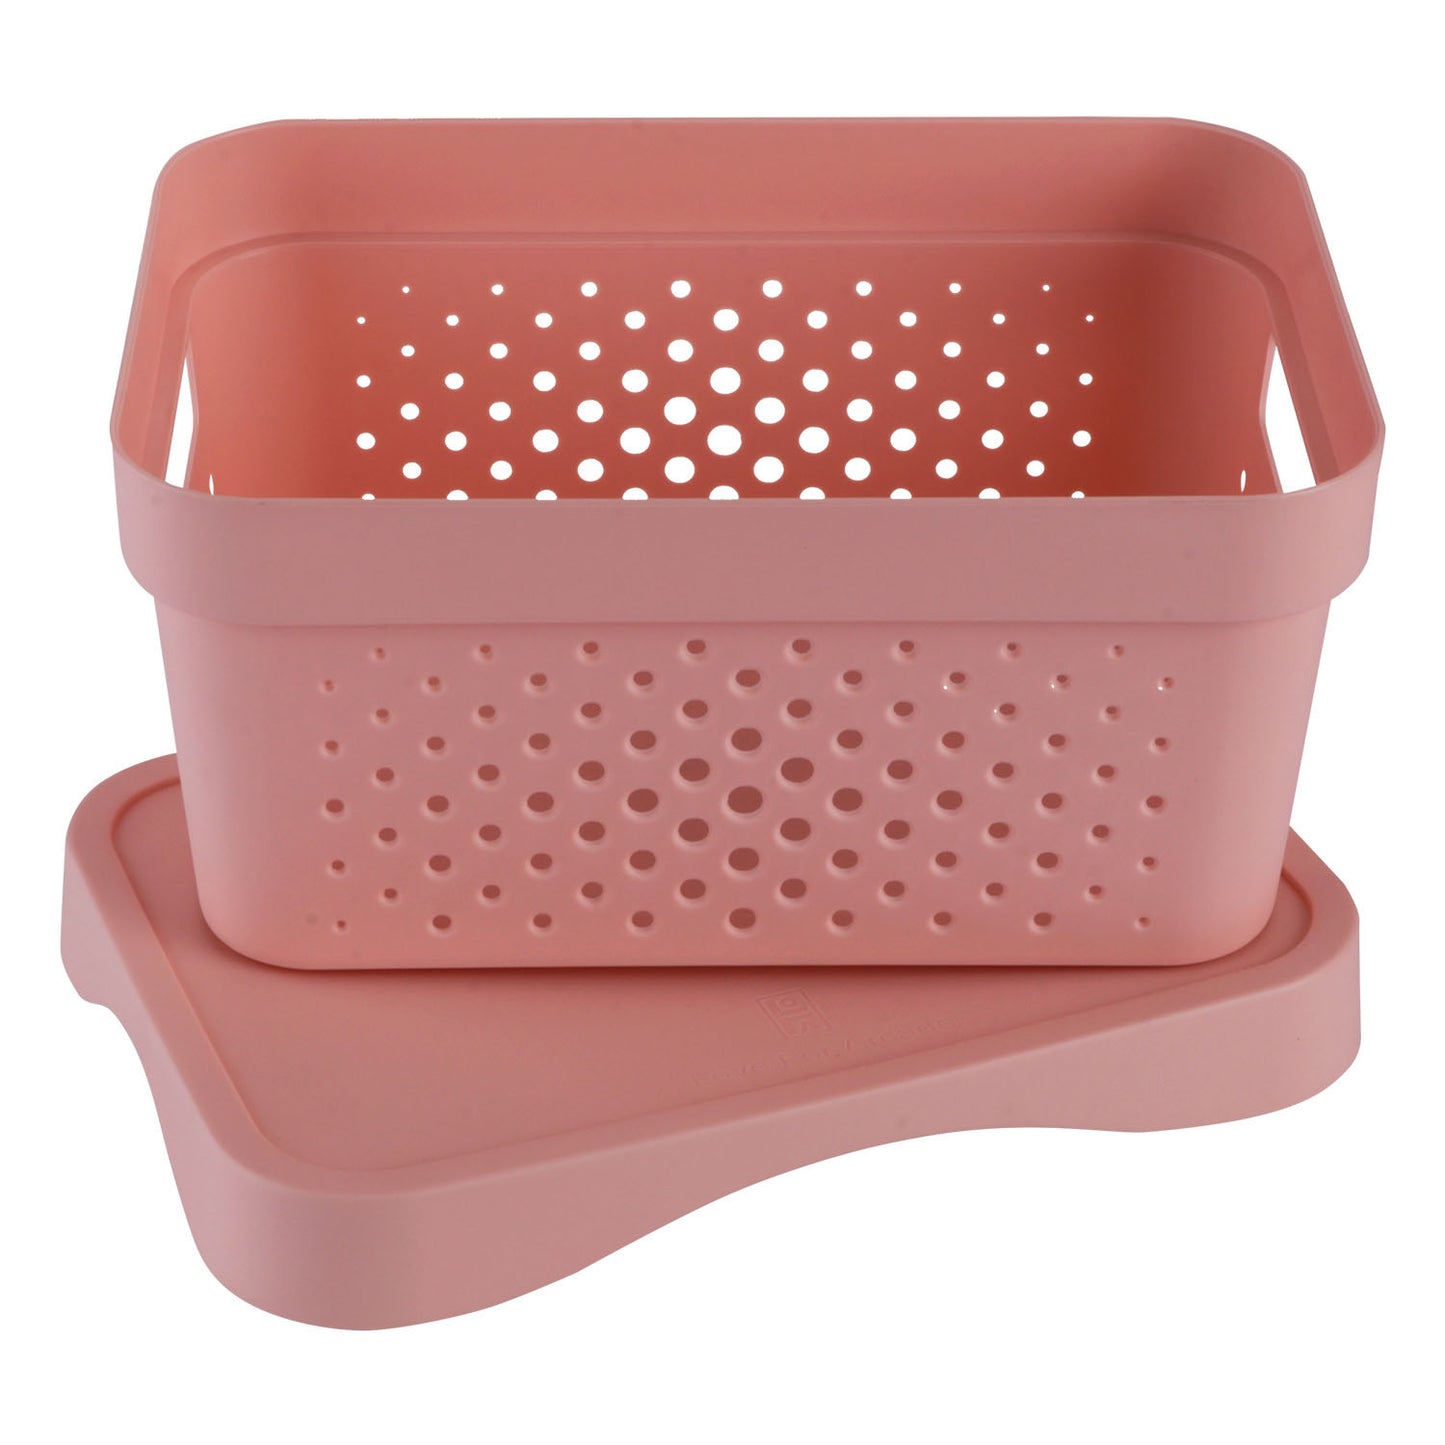 Multipurpose Basket with Lid| Premium Organisers by Sam Home Collection